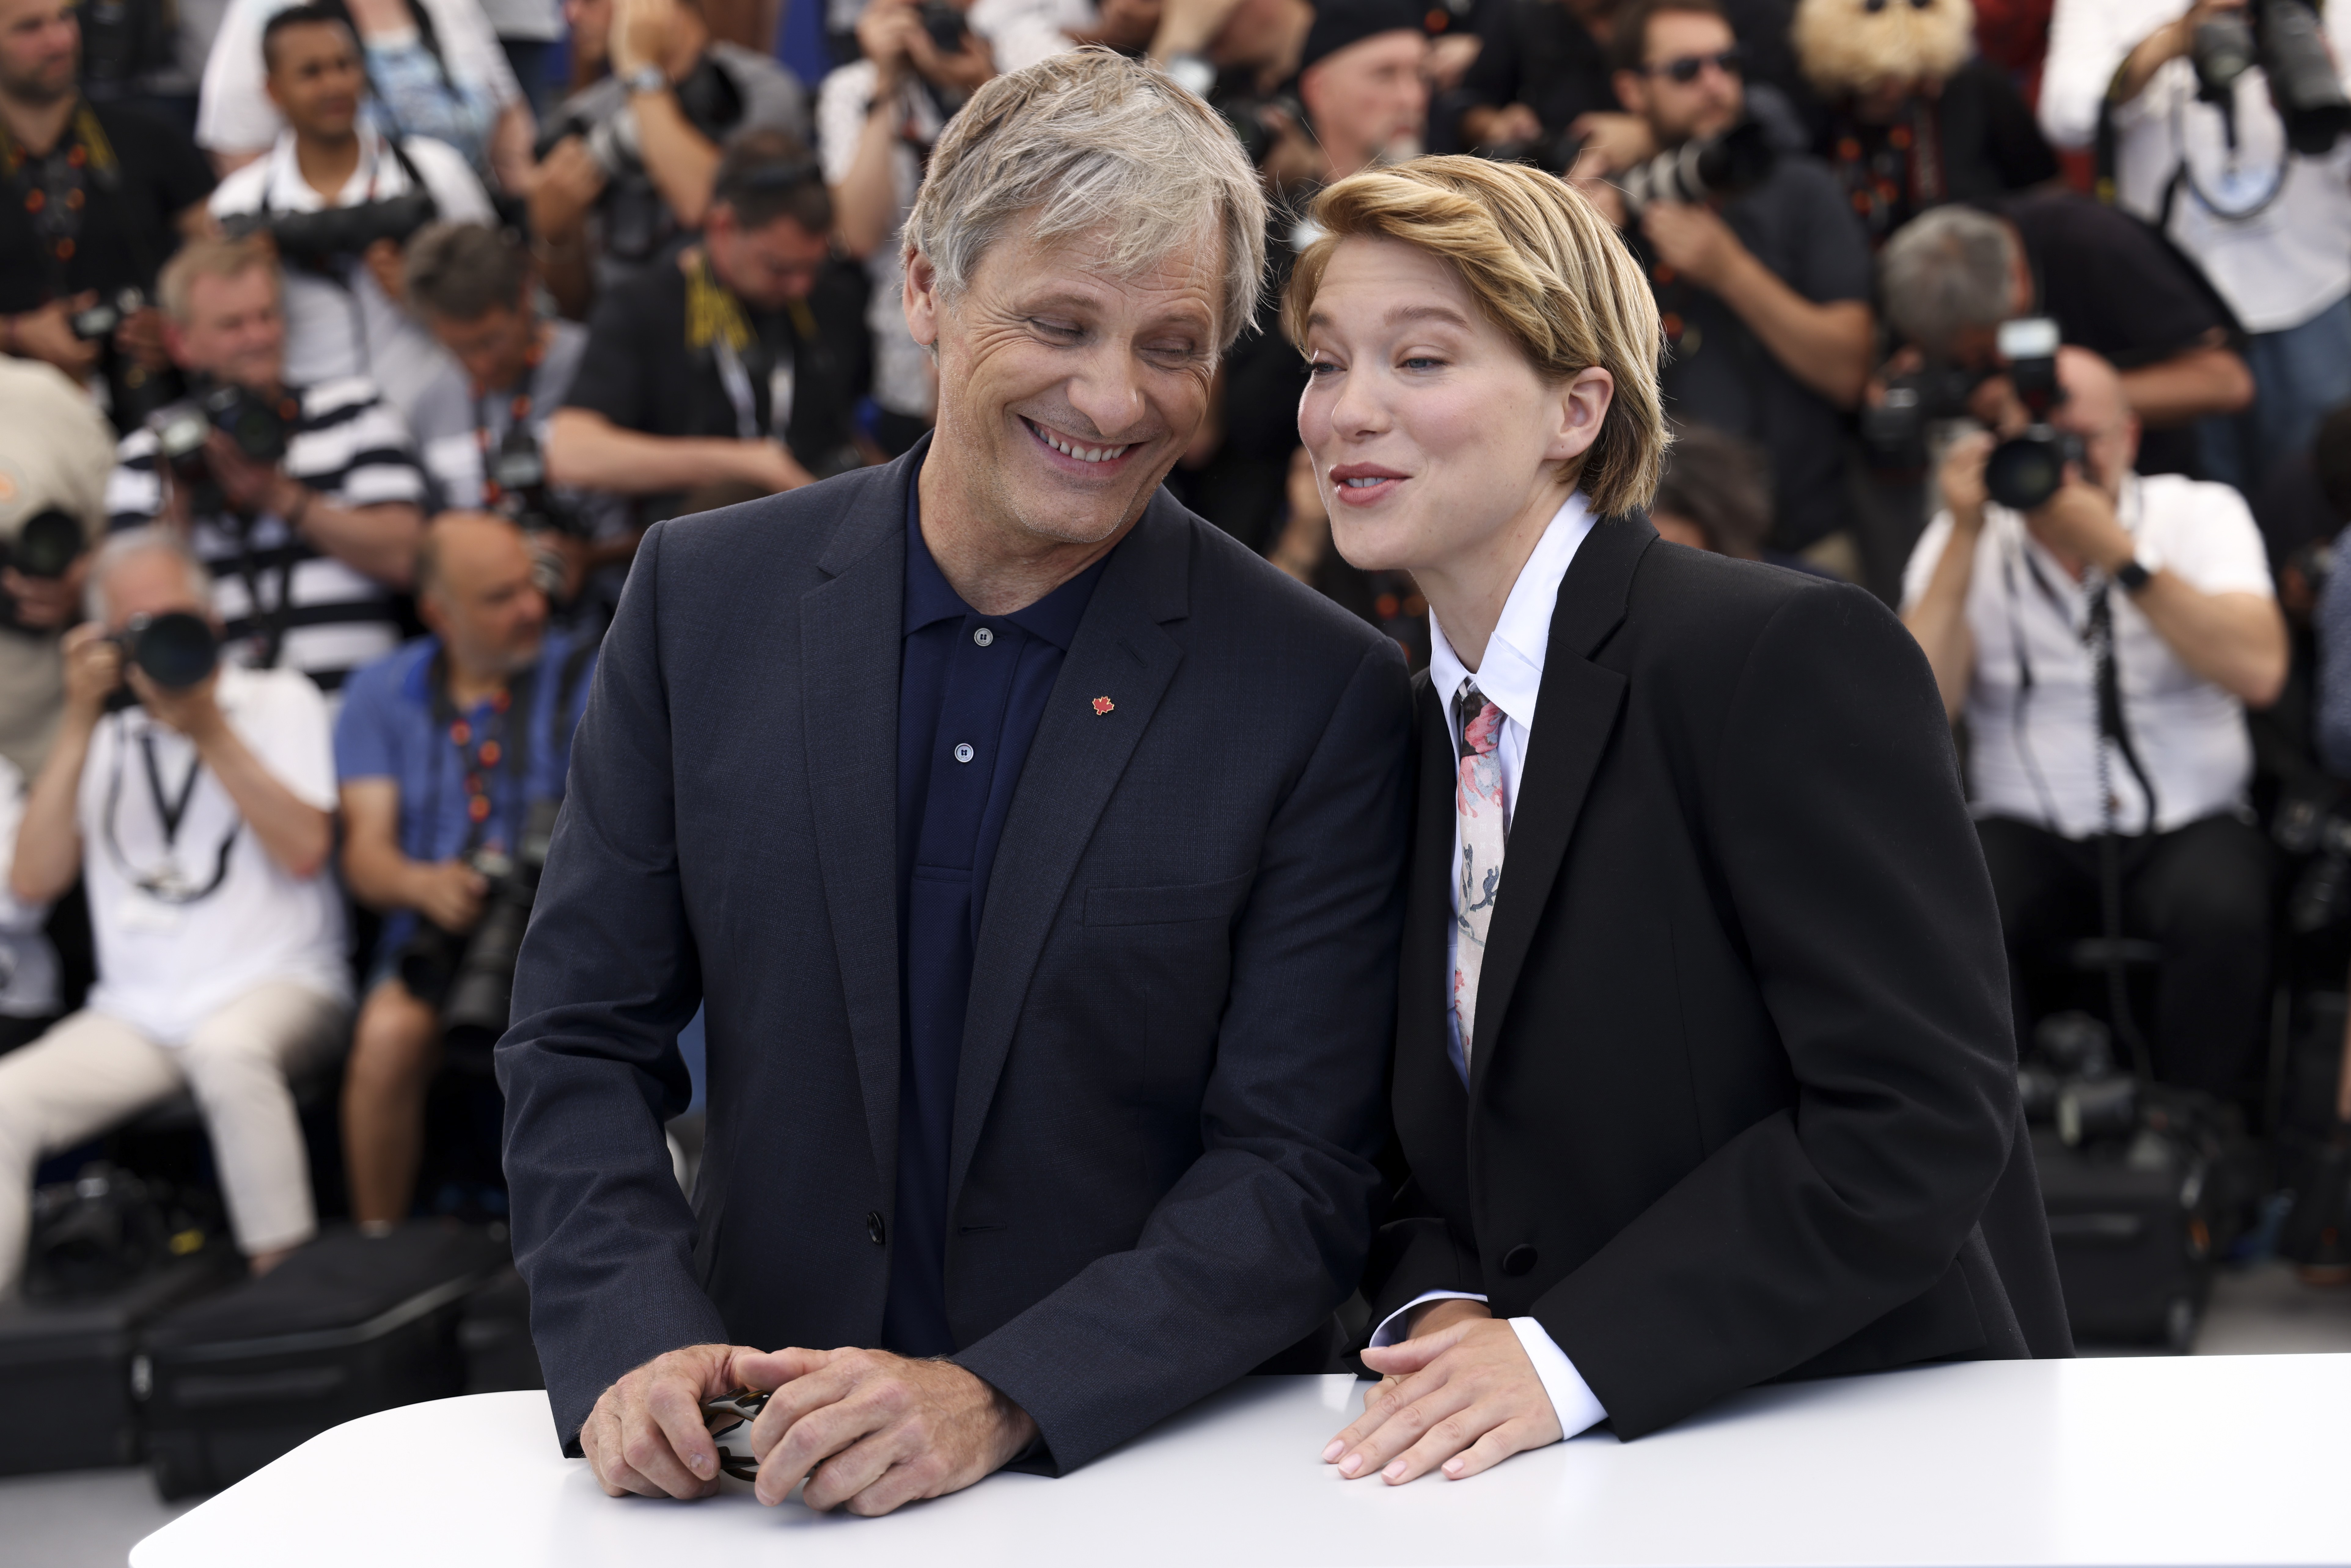 Actress Lea Seydoux tests positive for COVID-19; Cannes trip in doubt 